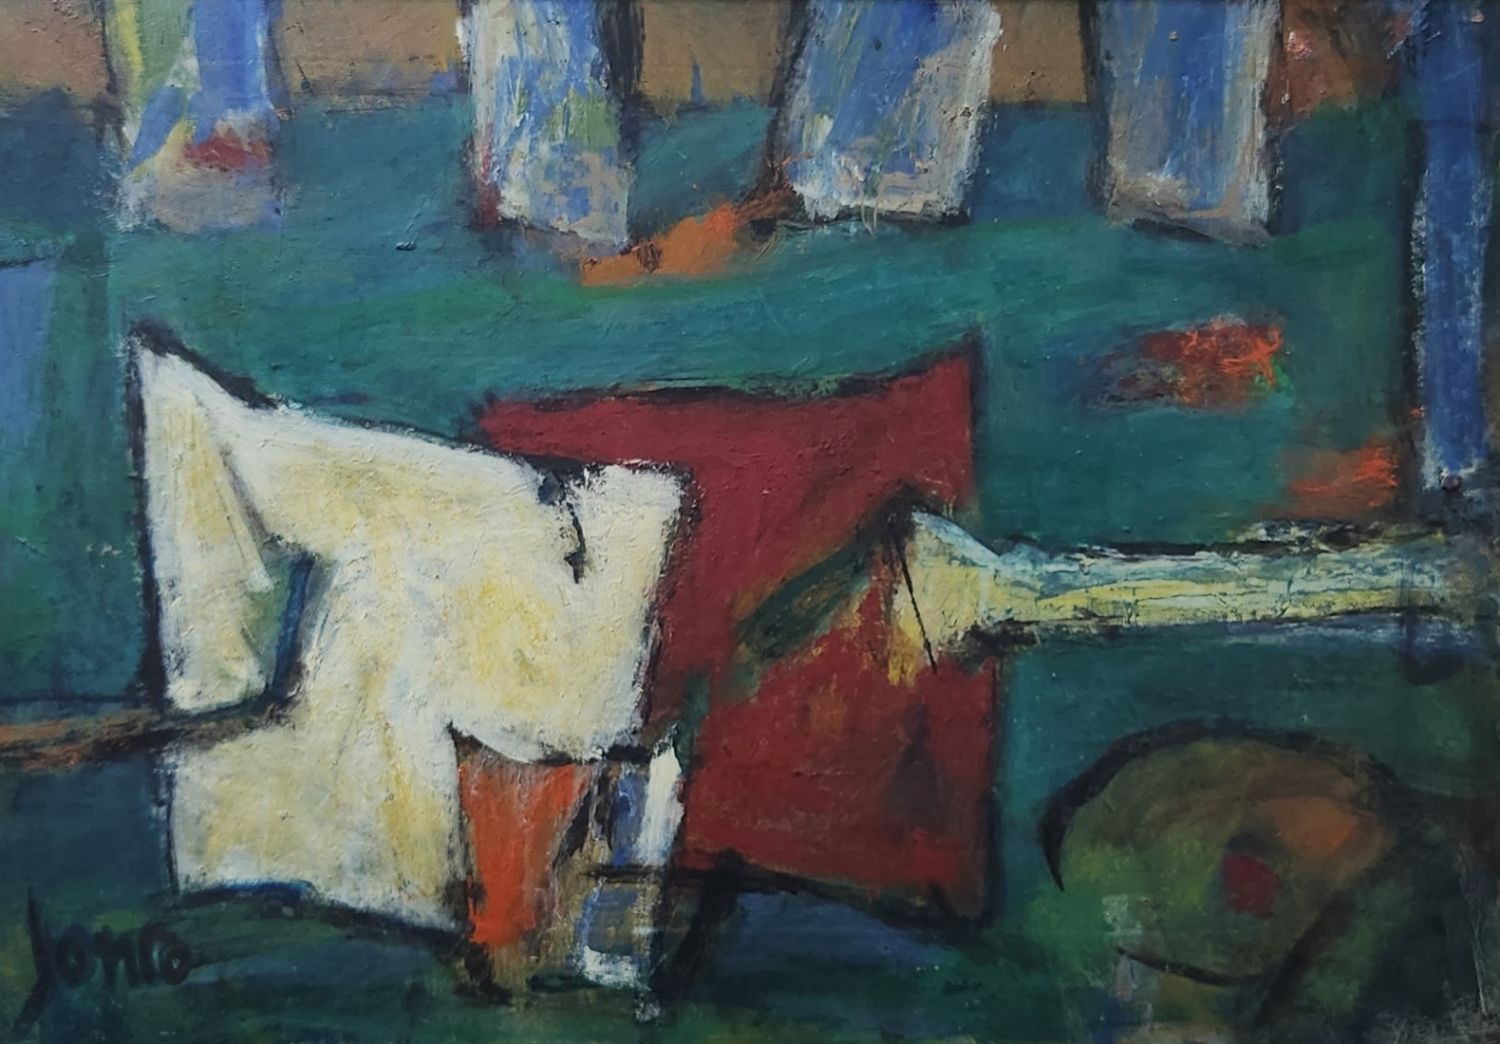 Marcel Janco - 'Abstract in red and white' -, oil on cardboard, Signed and dated on the back: